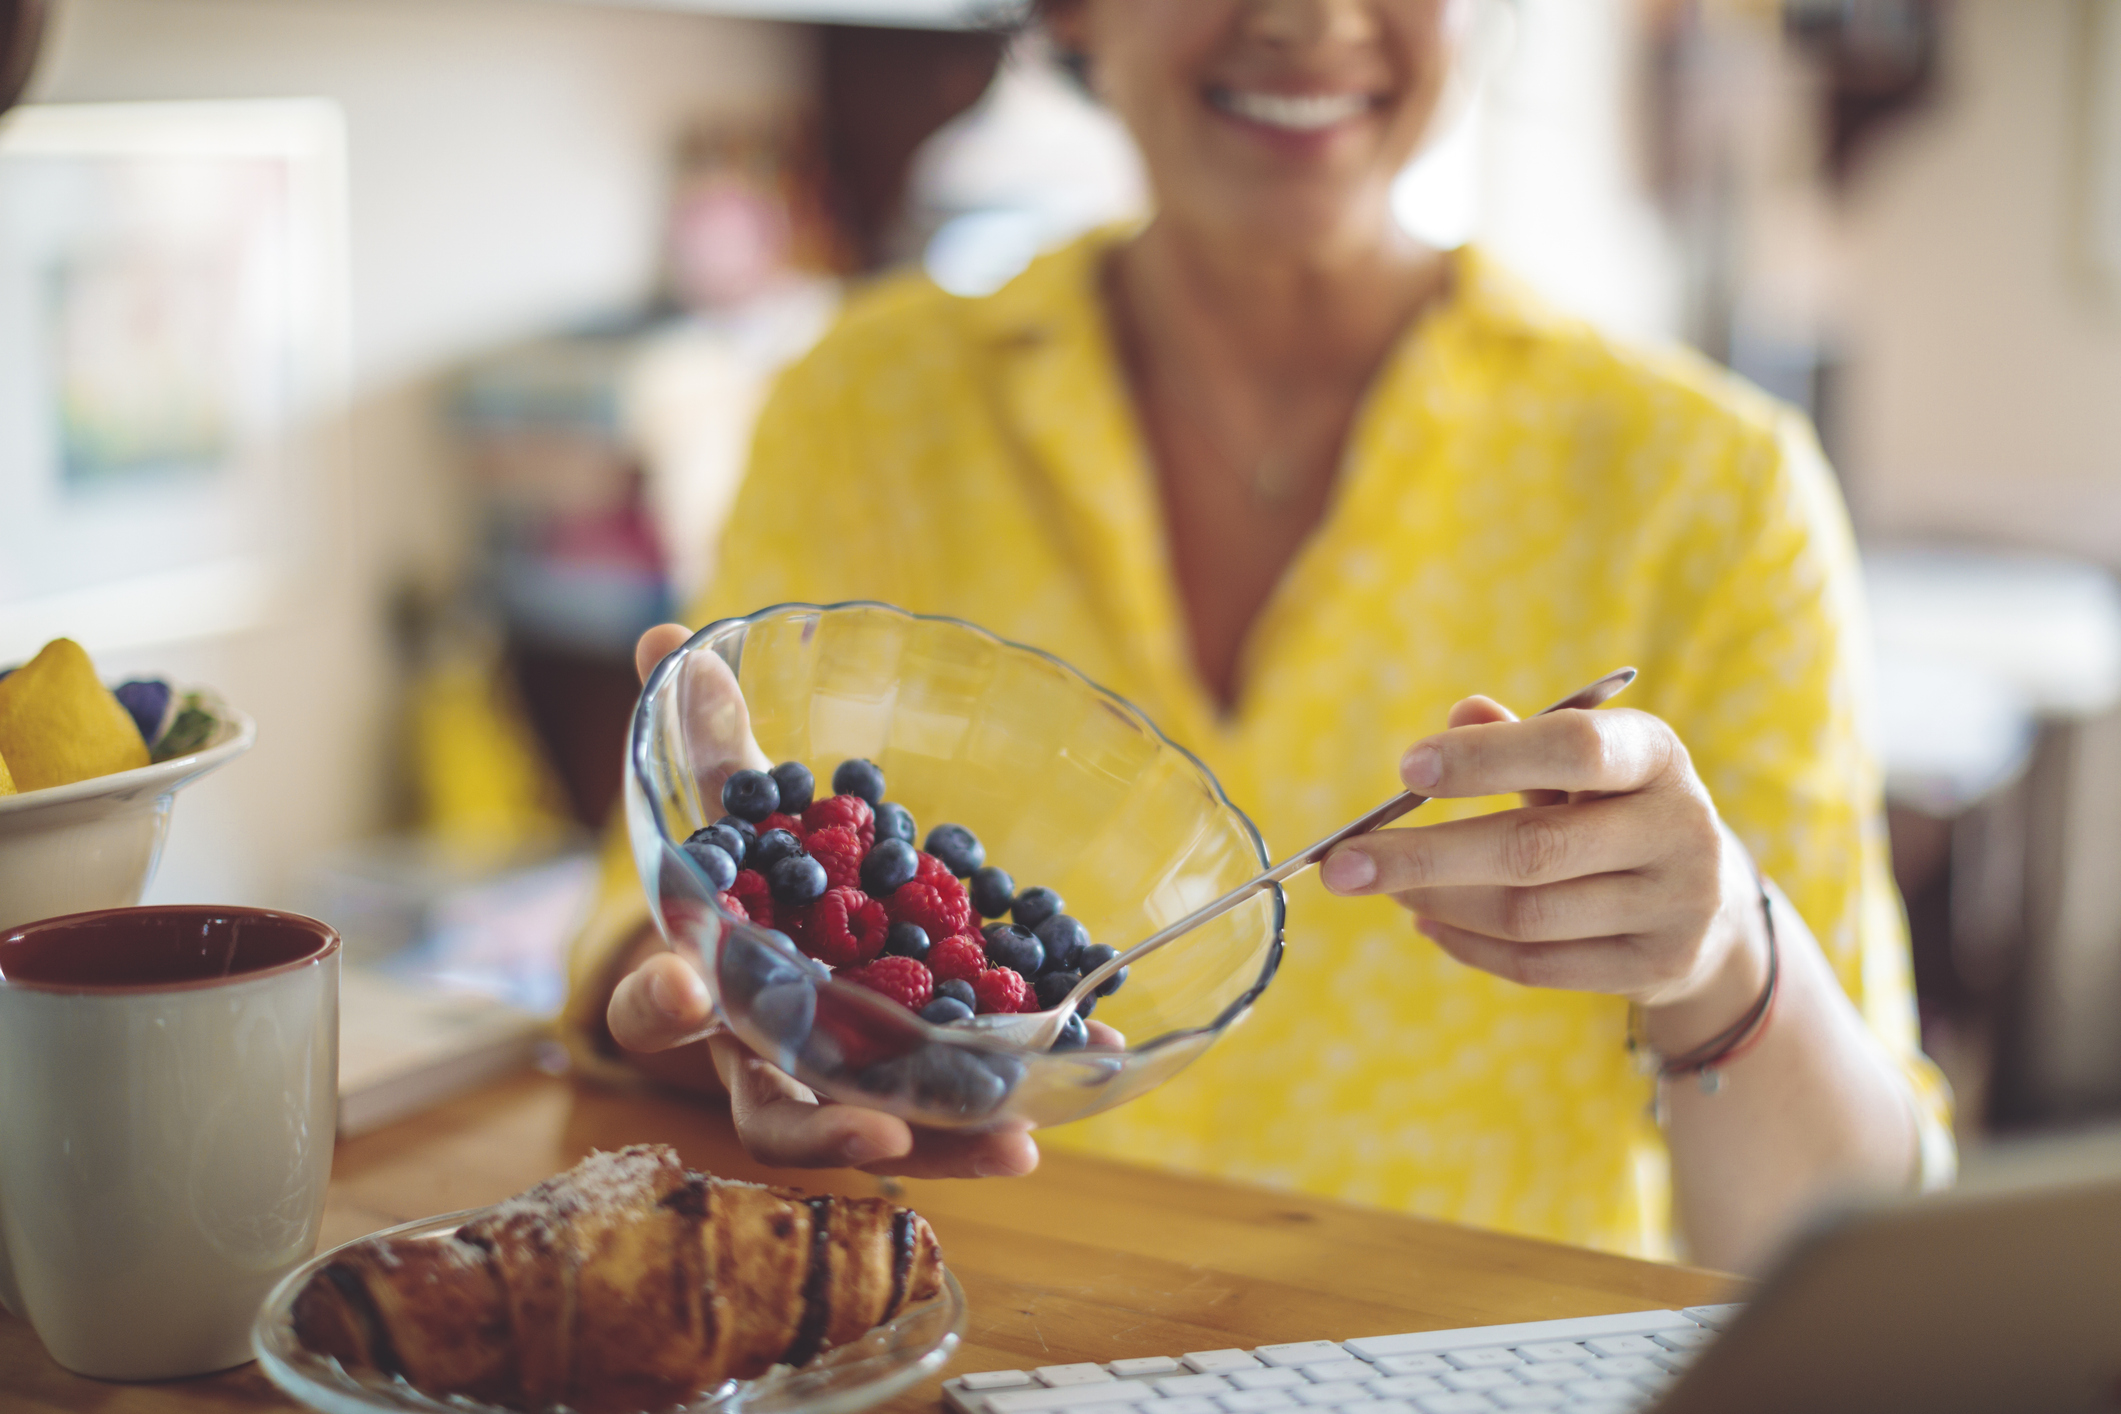 The antioxidant diet: foods and supplements that fit the bill